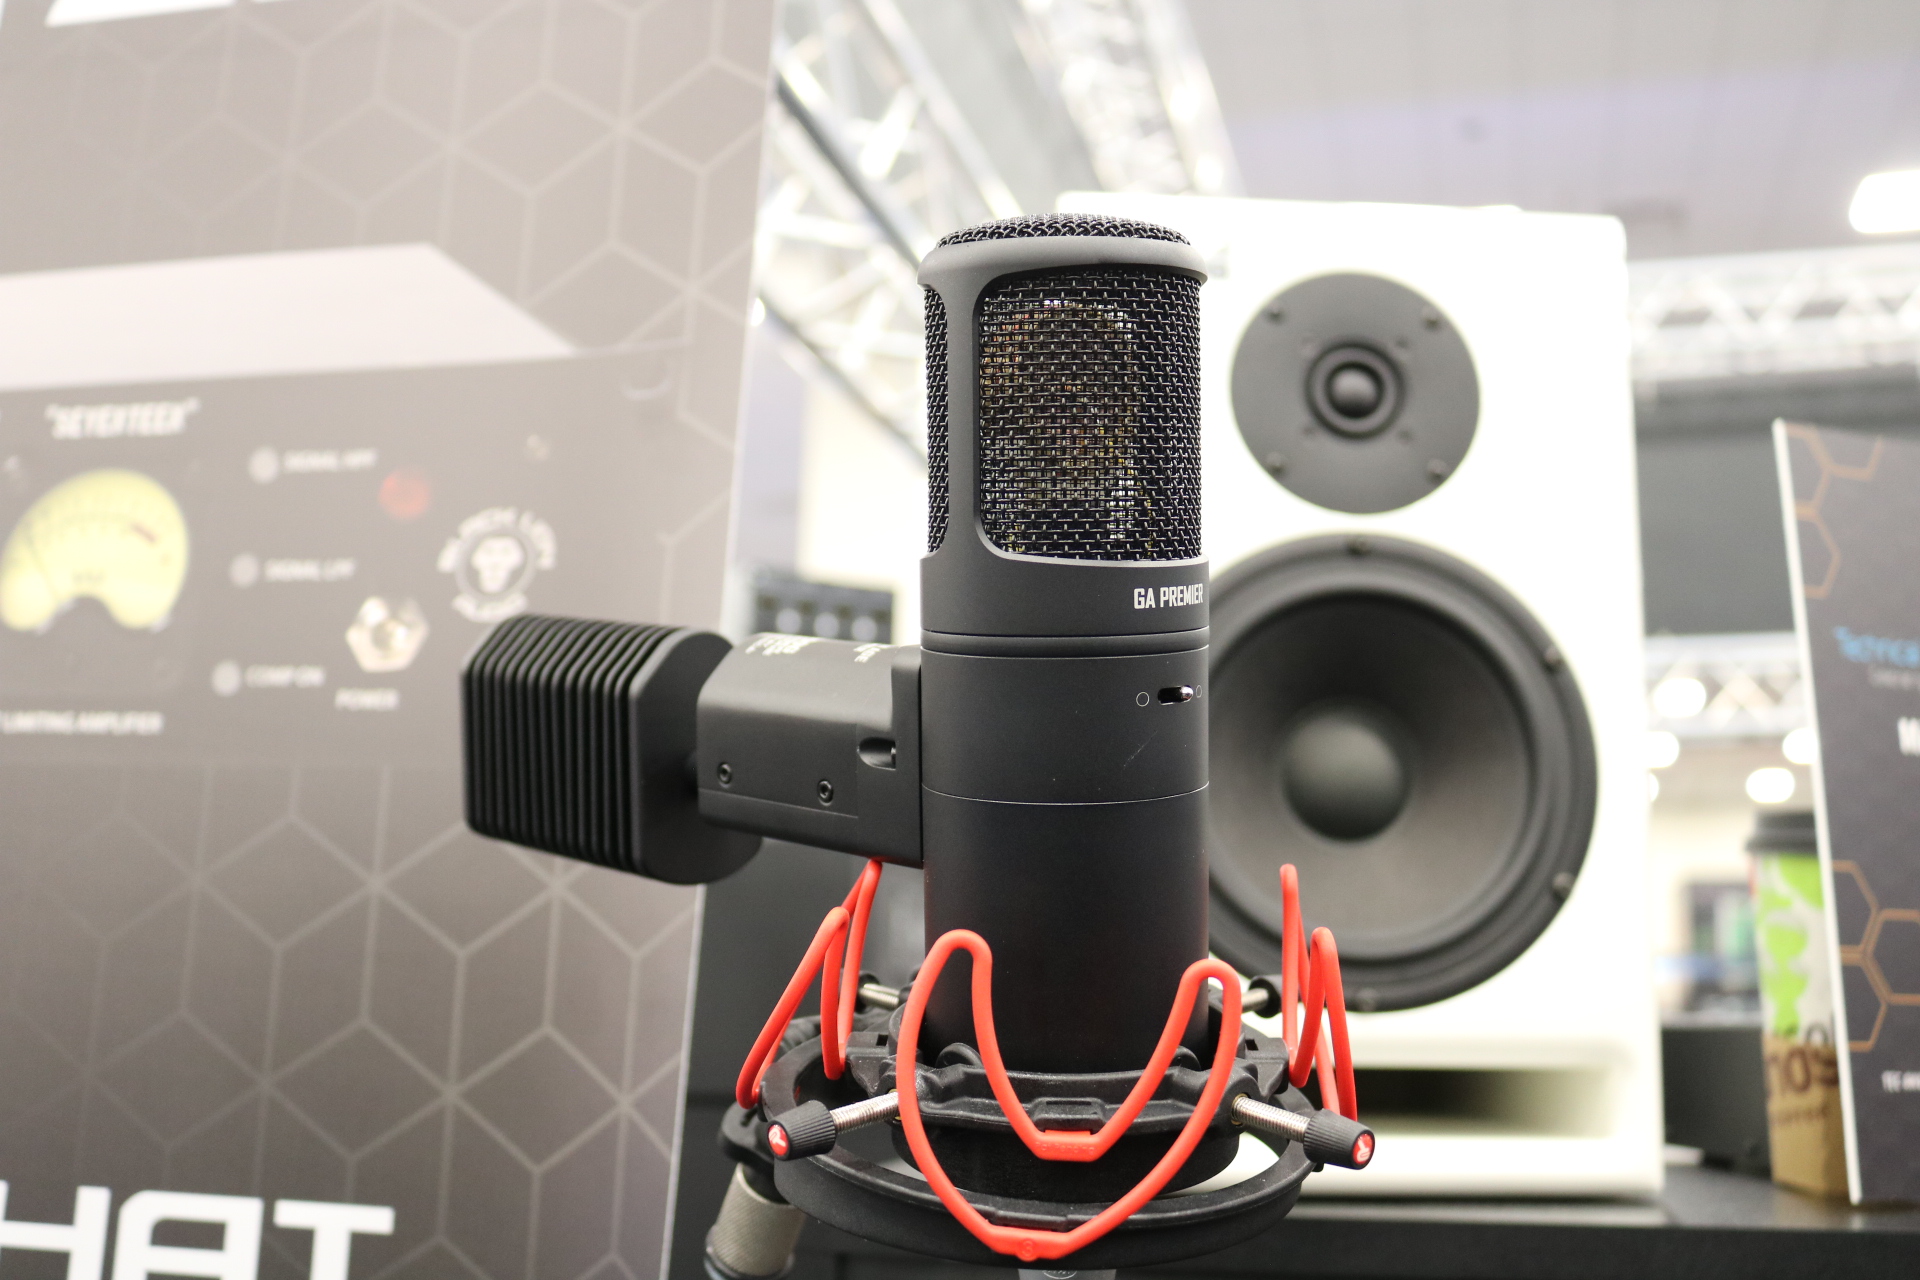 Photo Roundup: The New Gear of NAMM 2020